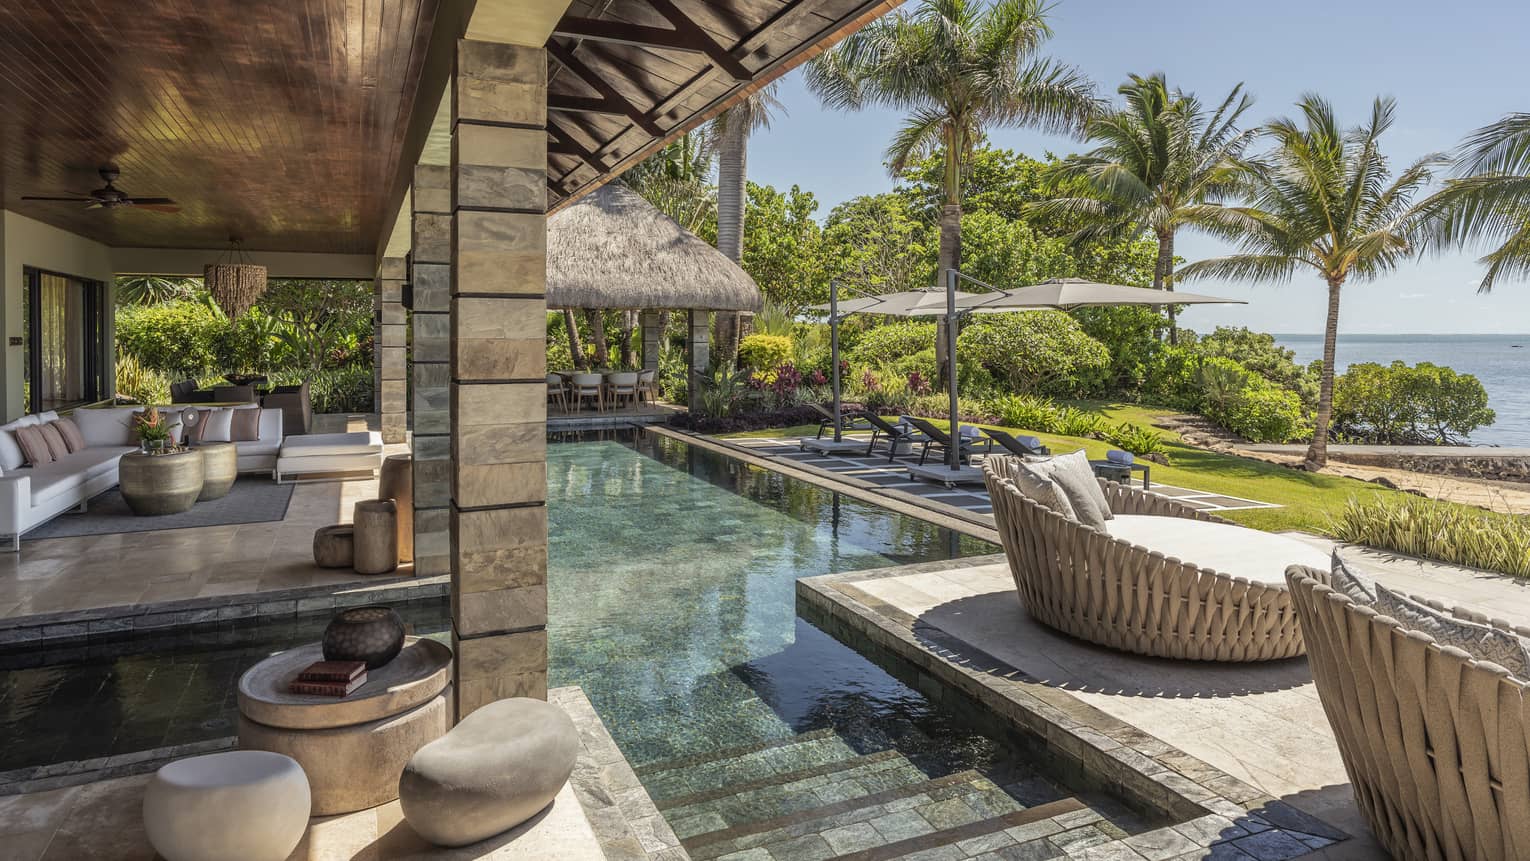 Stone, ocean-view terrace with pool, whicker day beds, pavilion covering